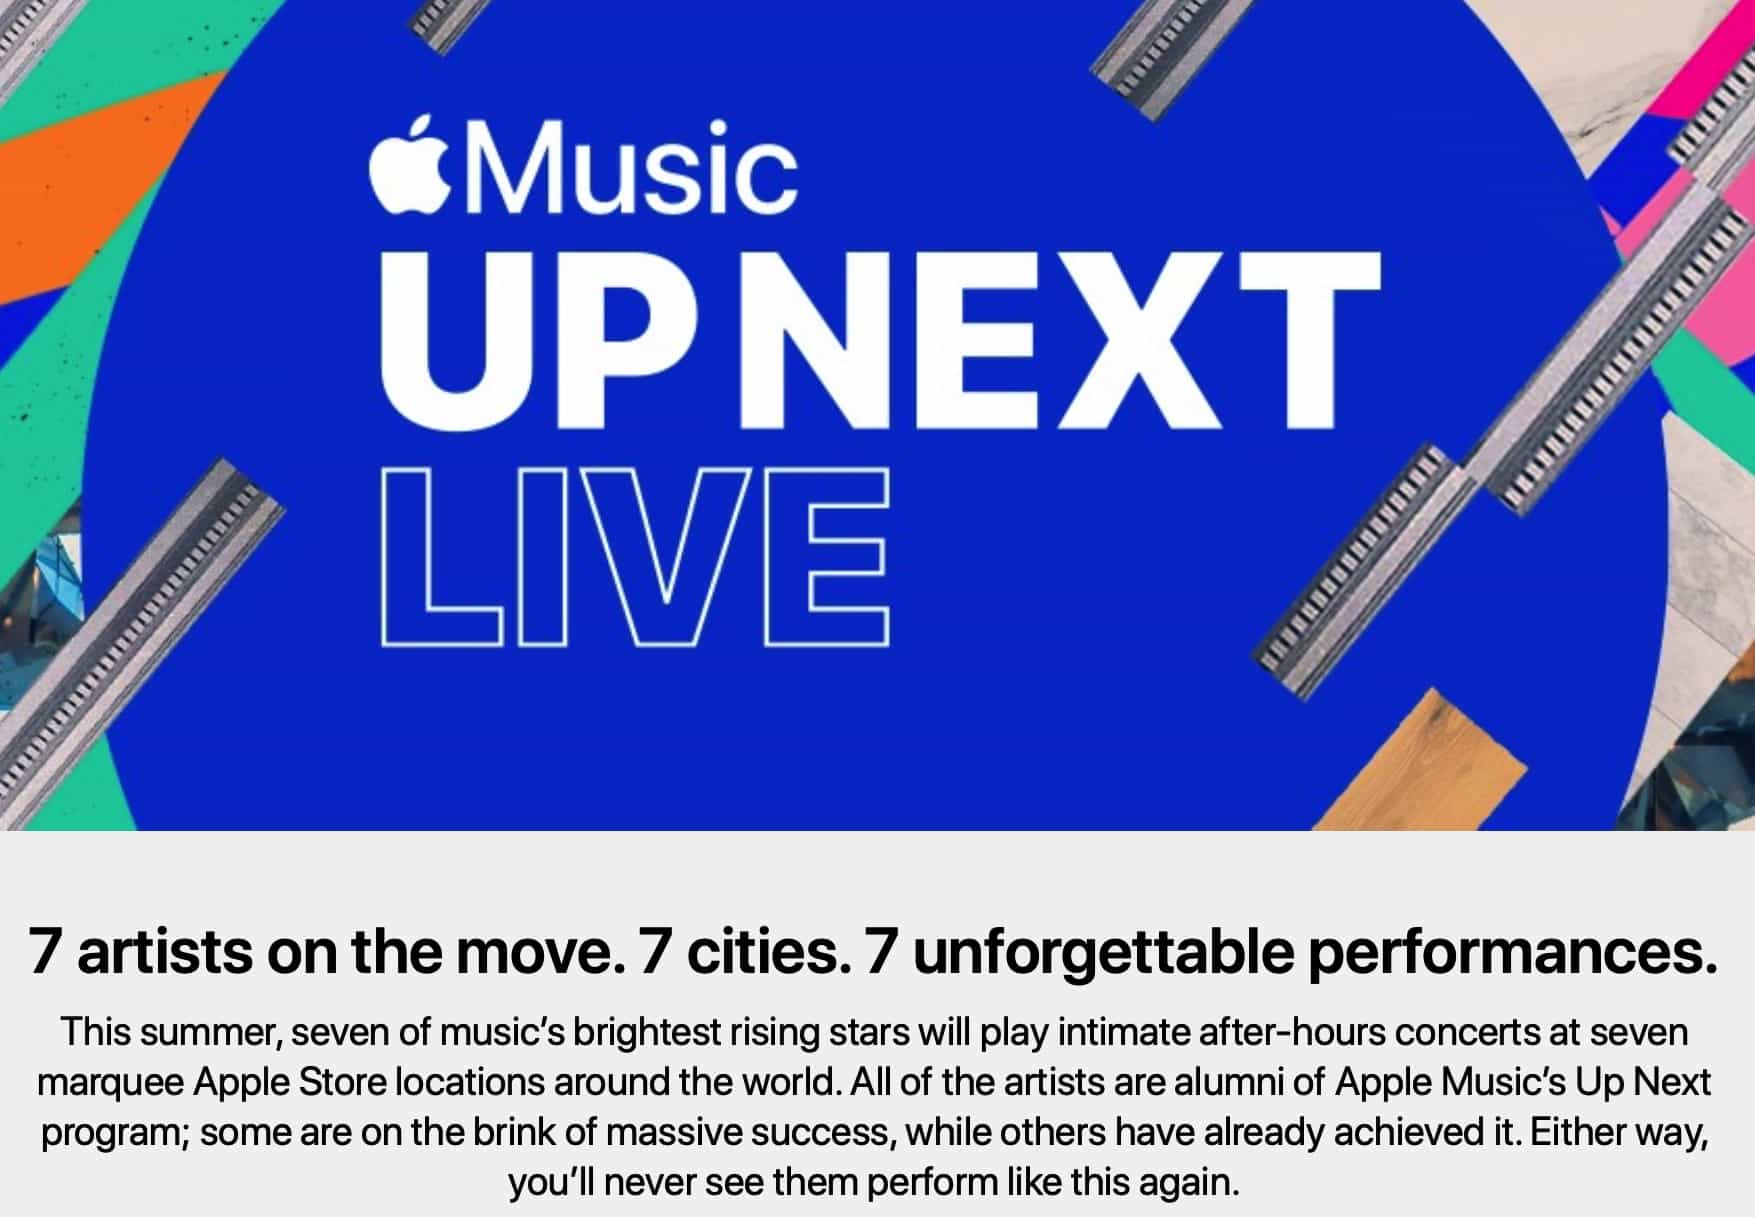 Apple's free Up Next concerts feature some pretty big names.